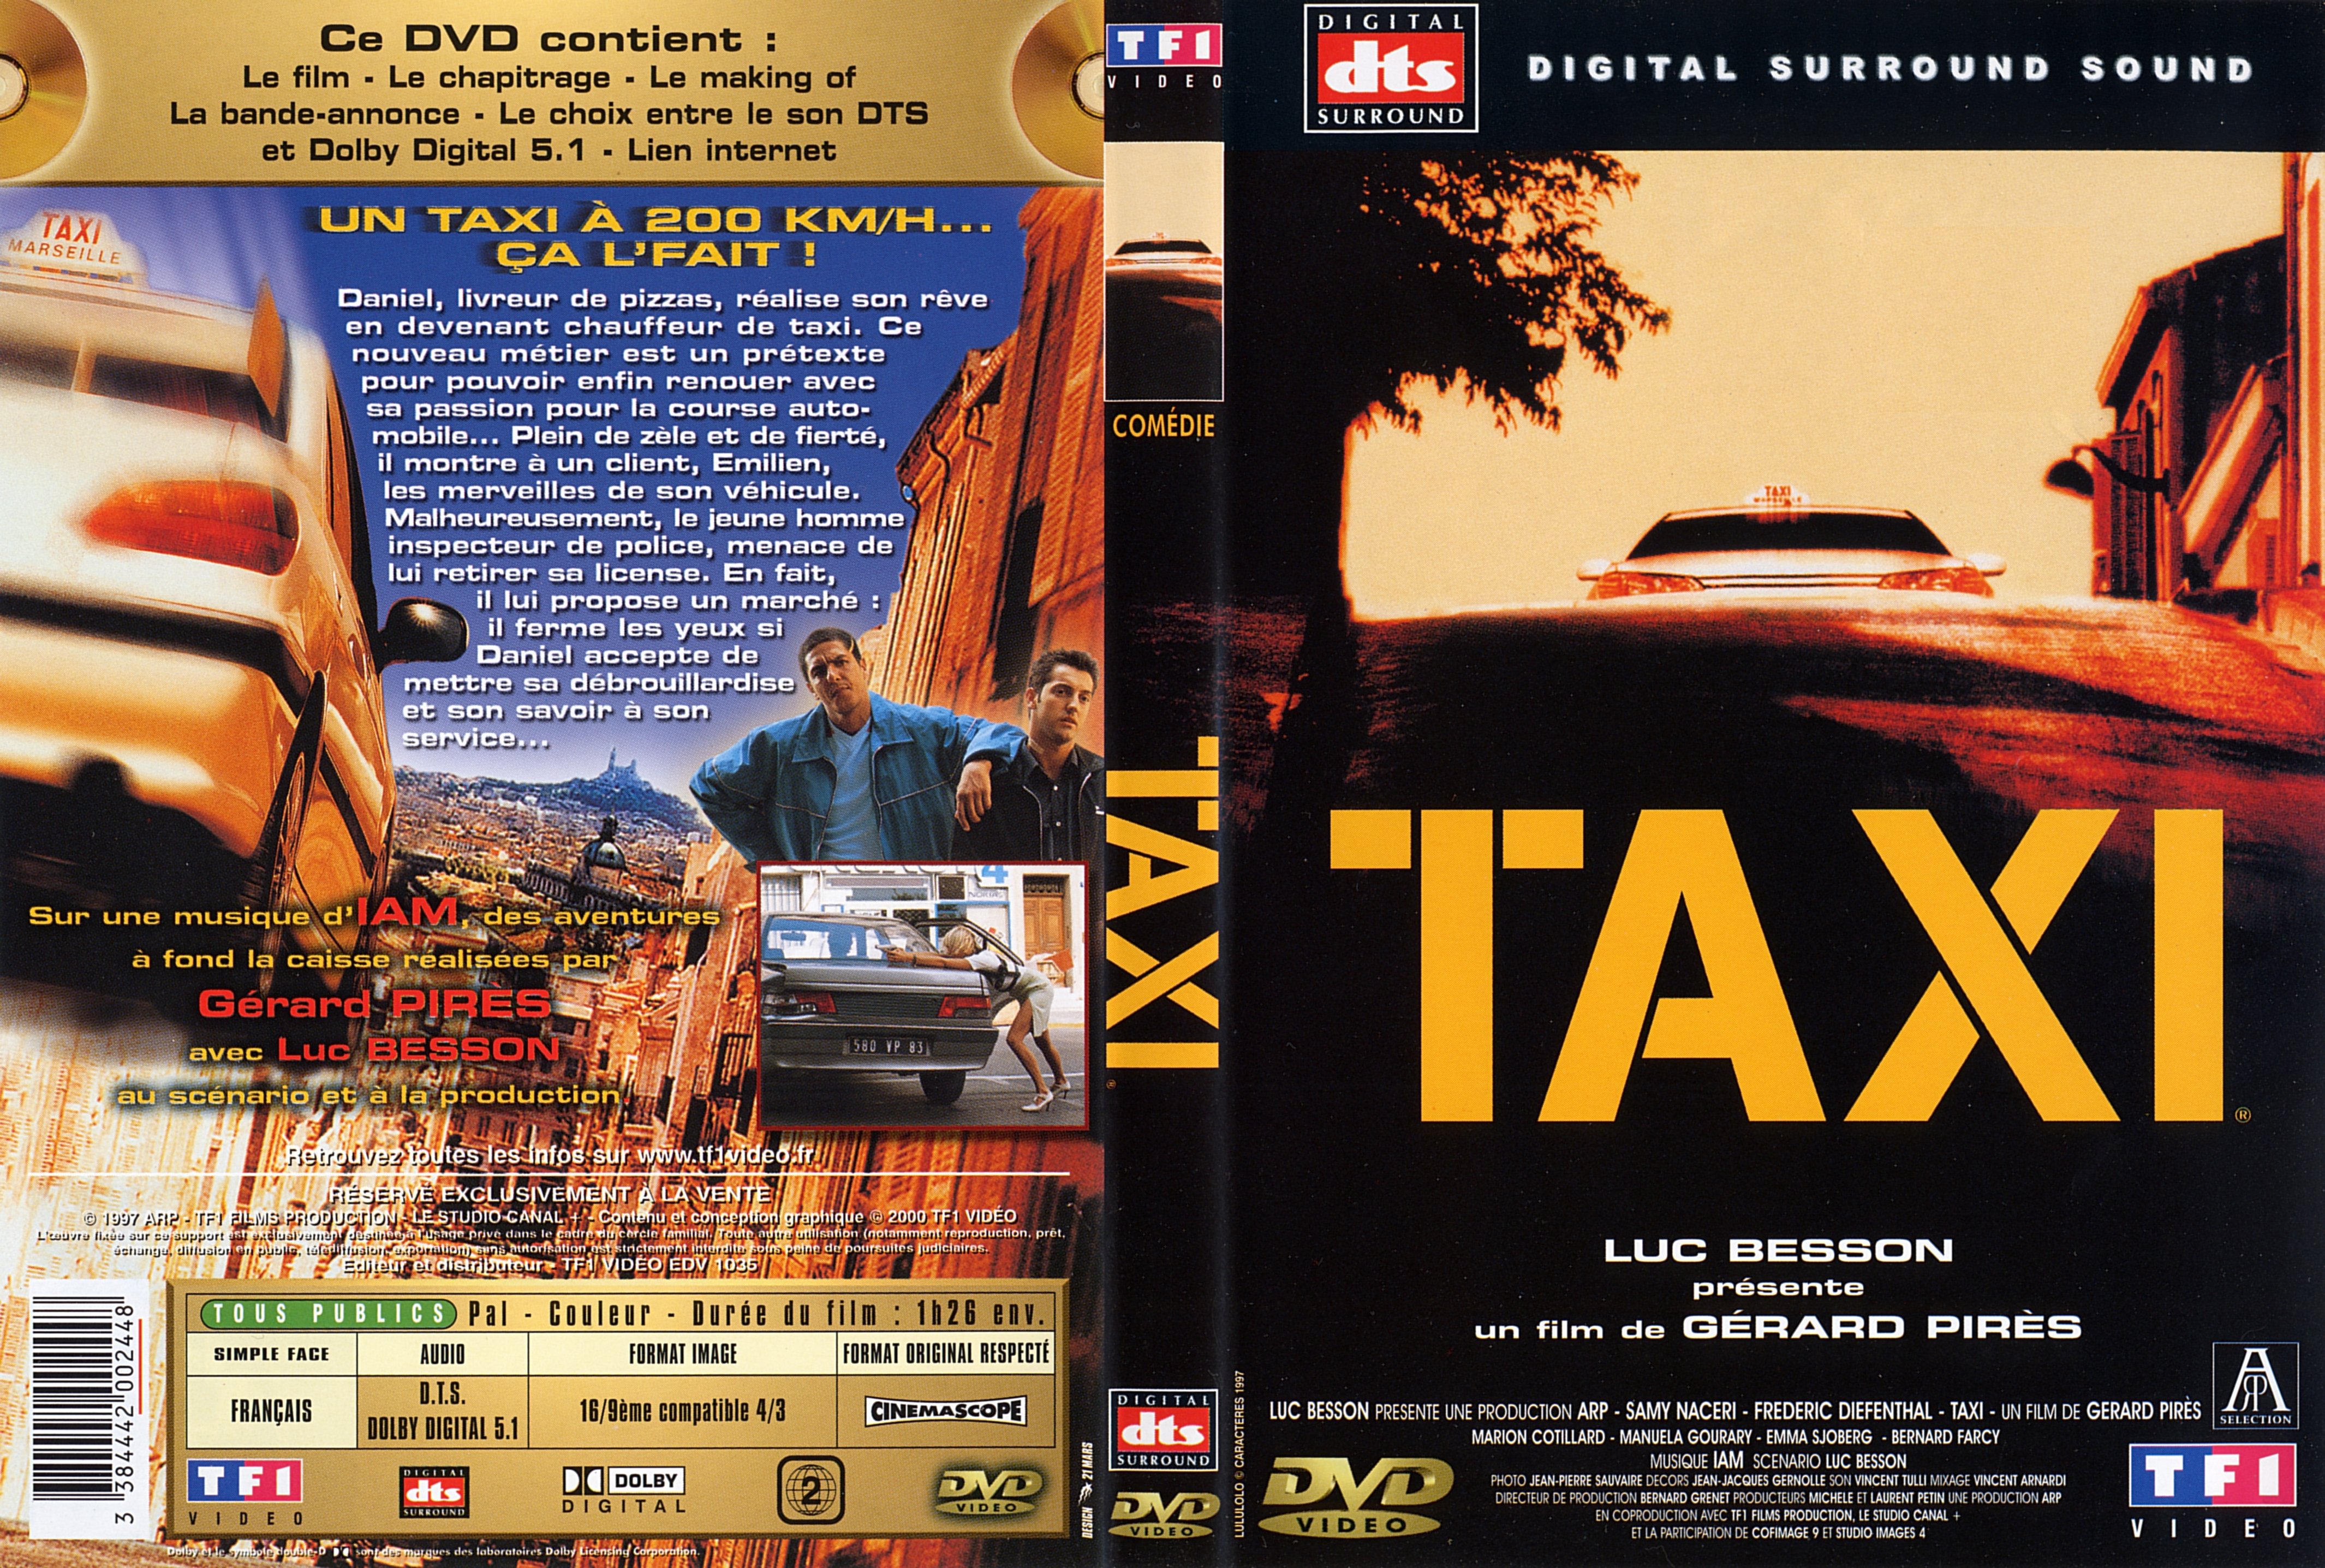 Jaquette DVD Taxi